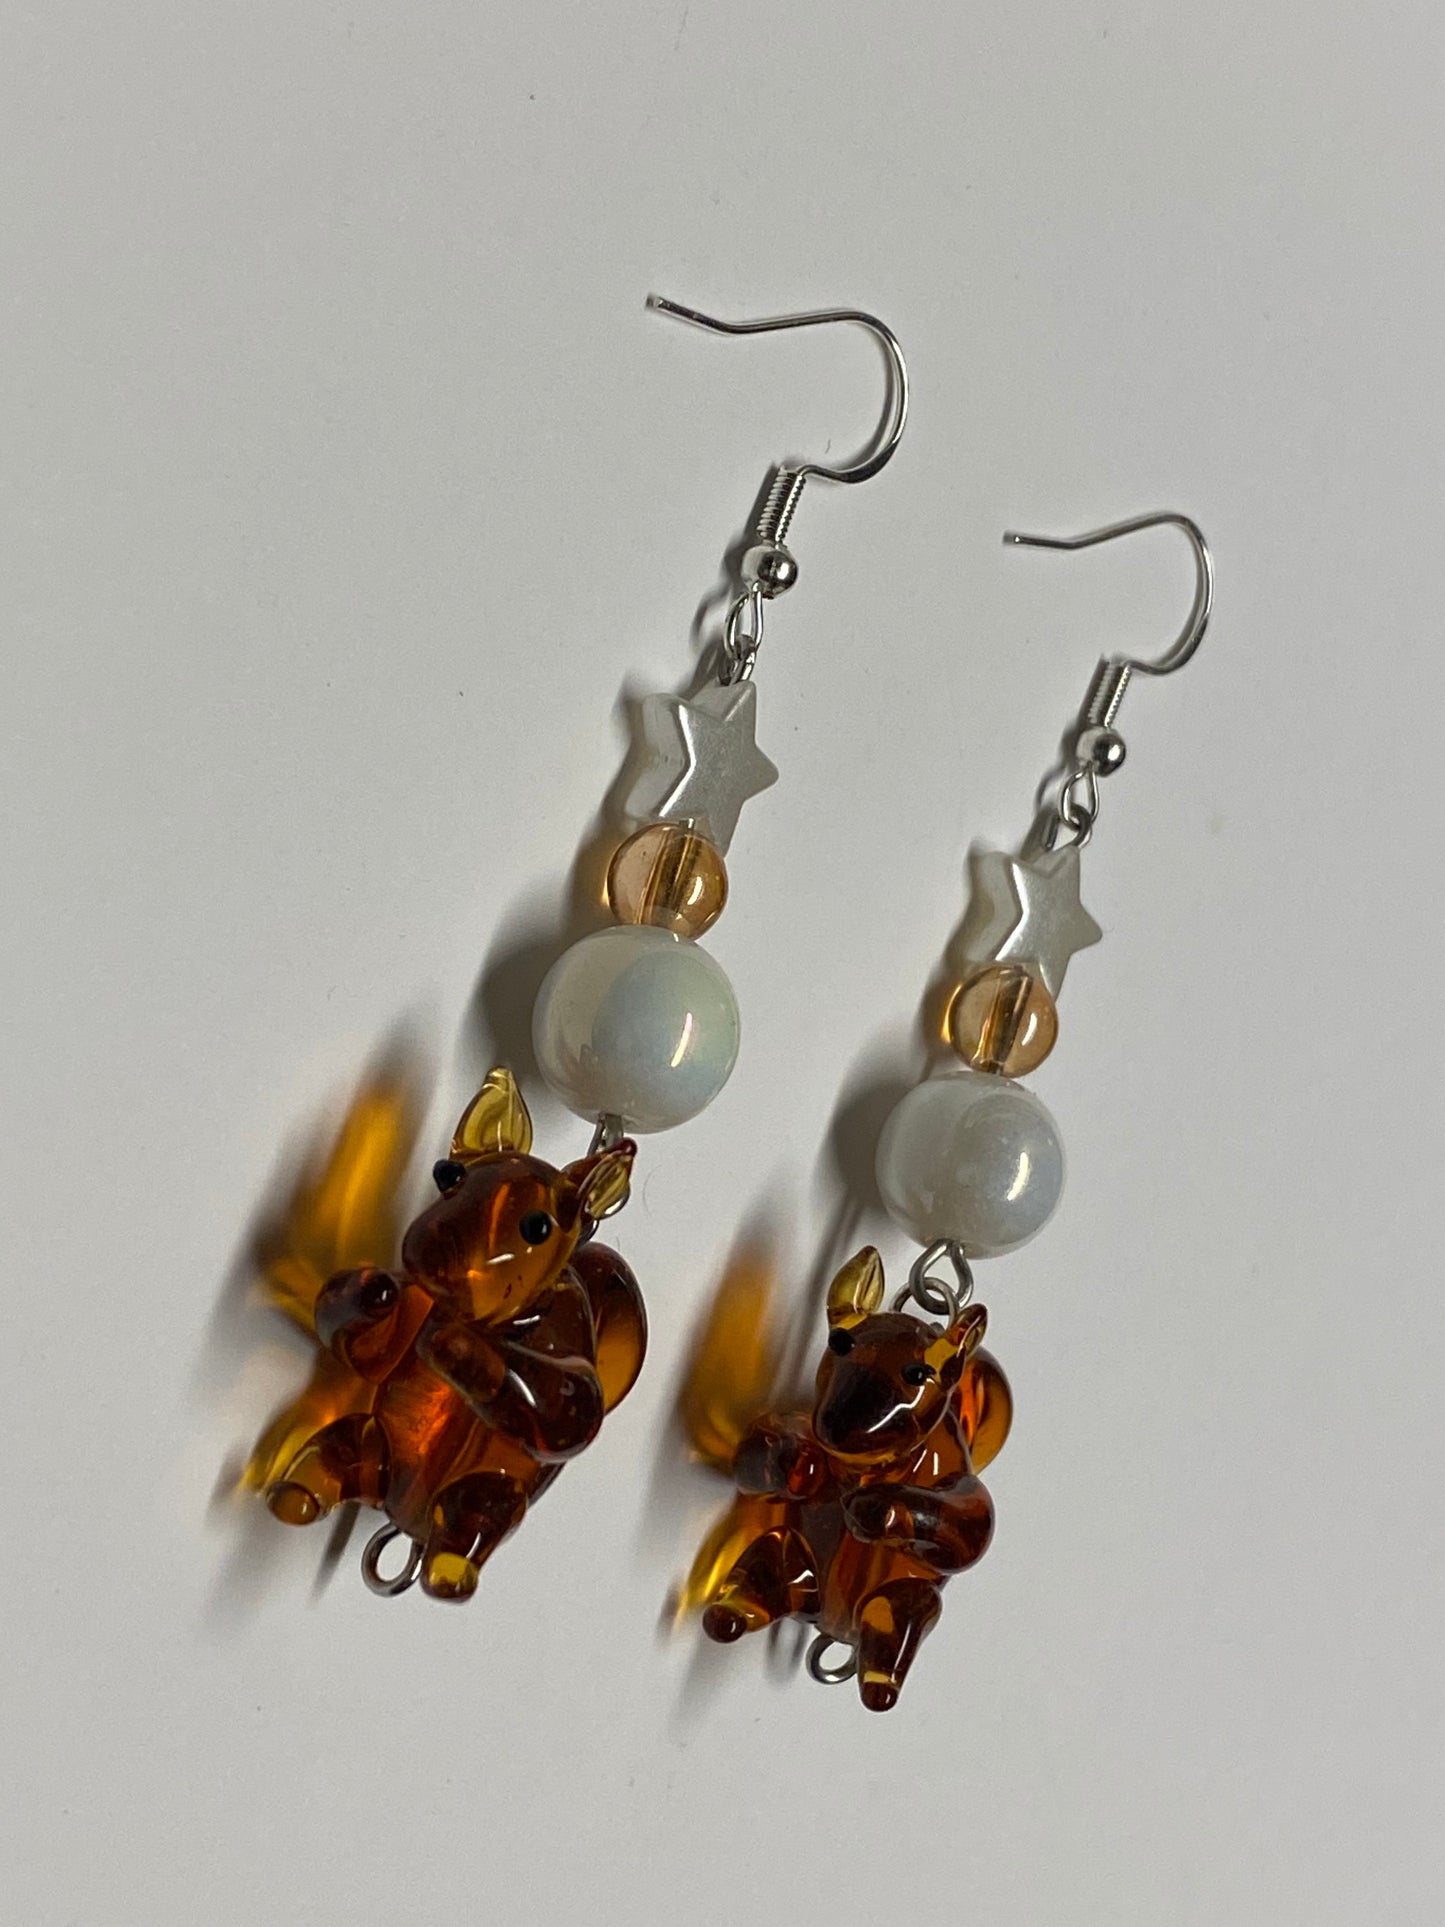 ‘Just Squirrelling around’ Earrings